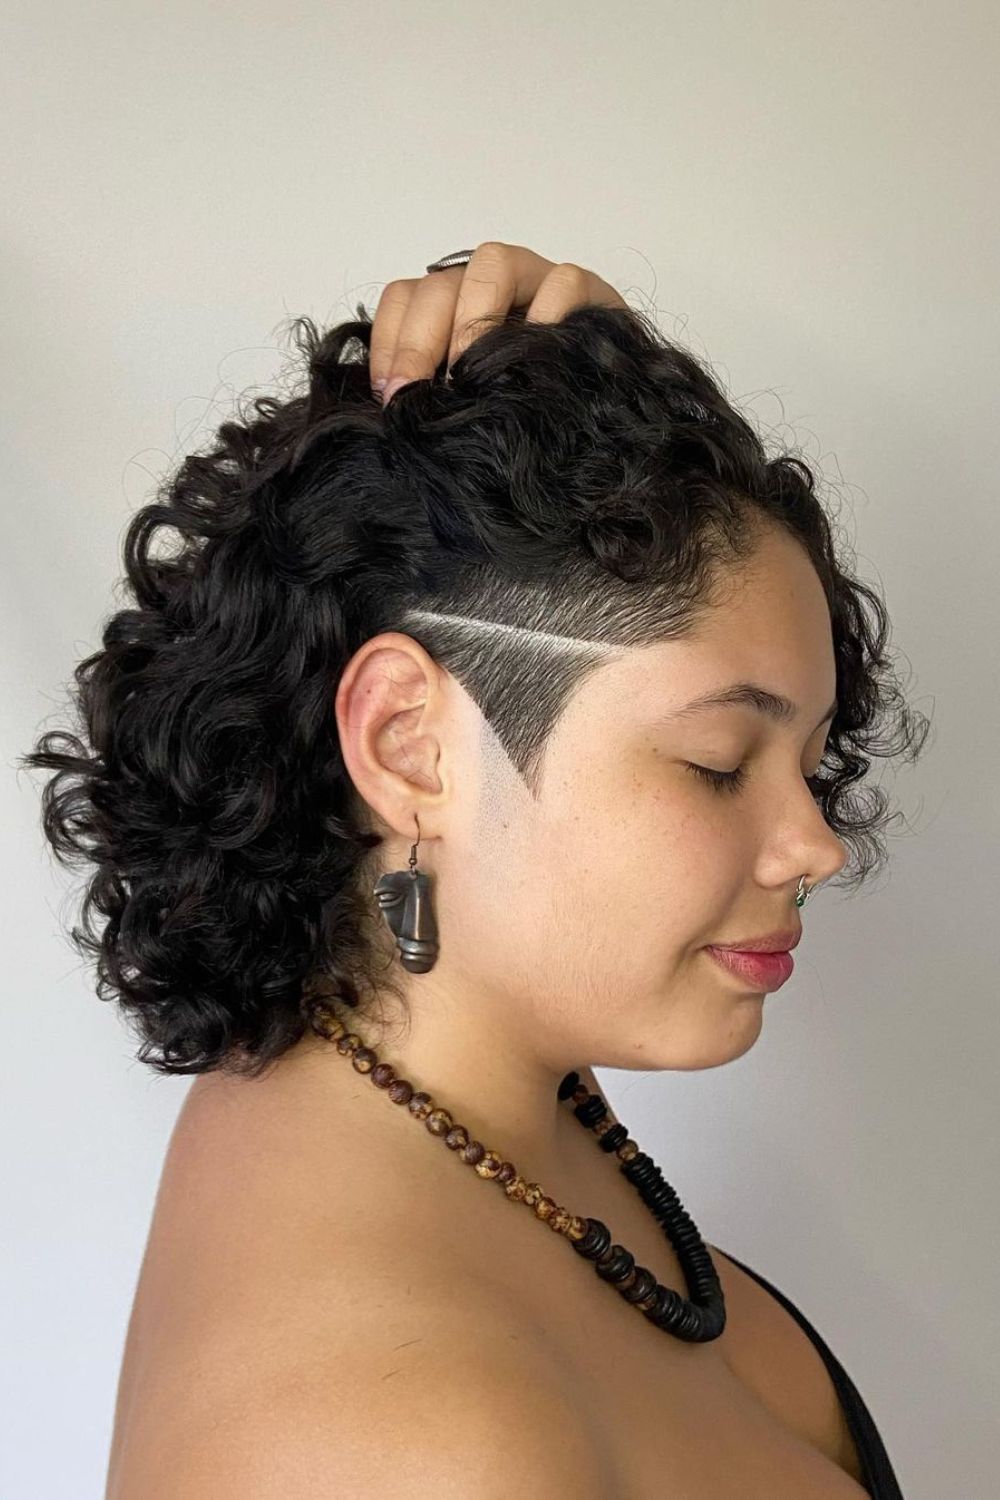 A woman with a black curly short sidecut.